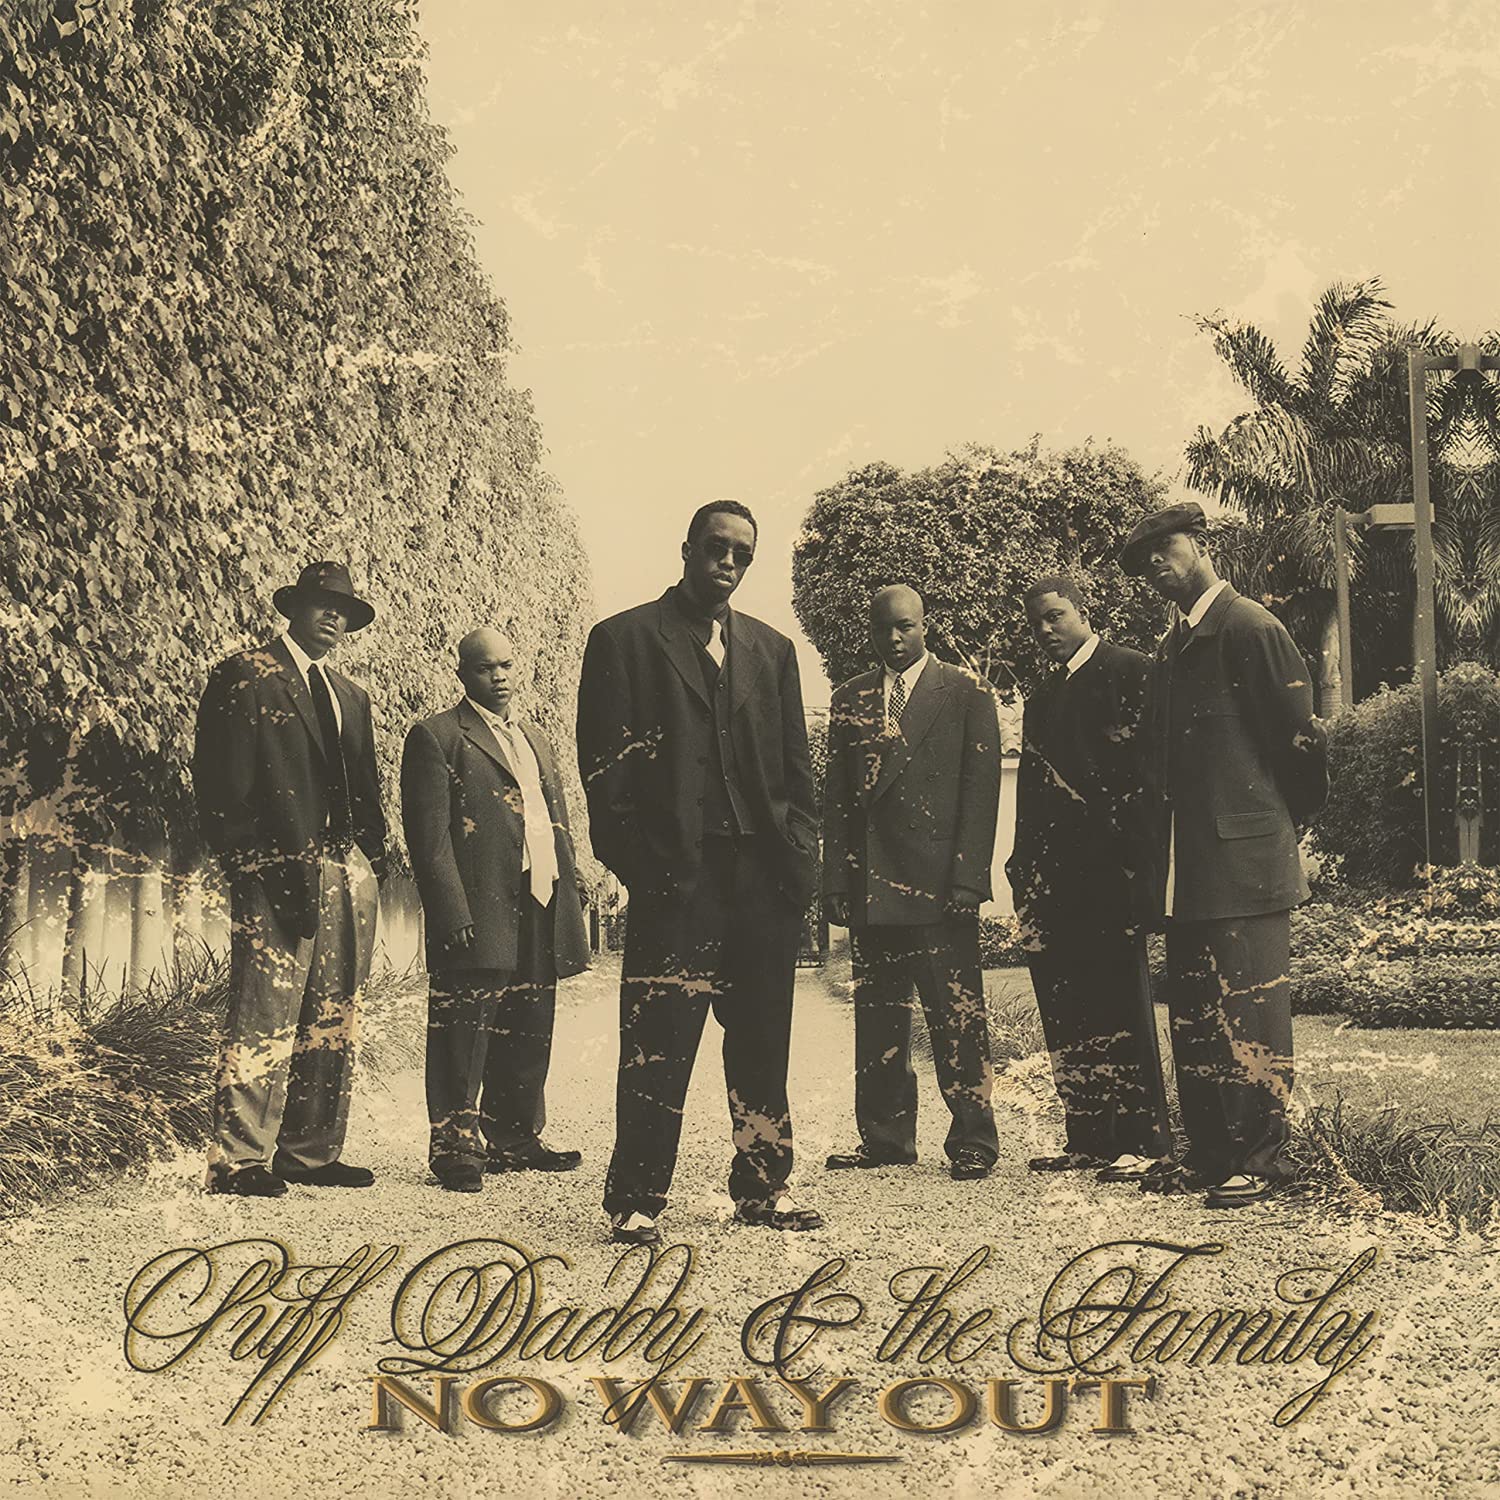 Puff Daddy & The Family No Way Out Limited White Vinyl LP